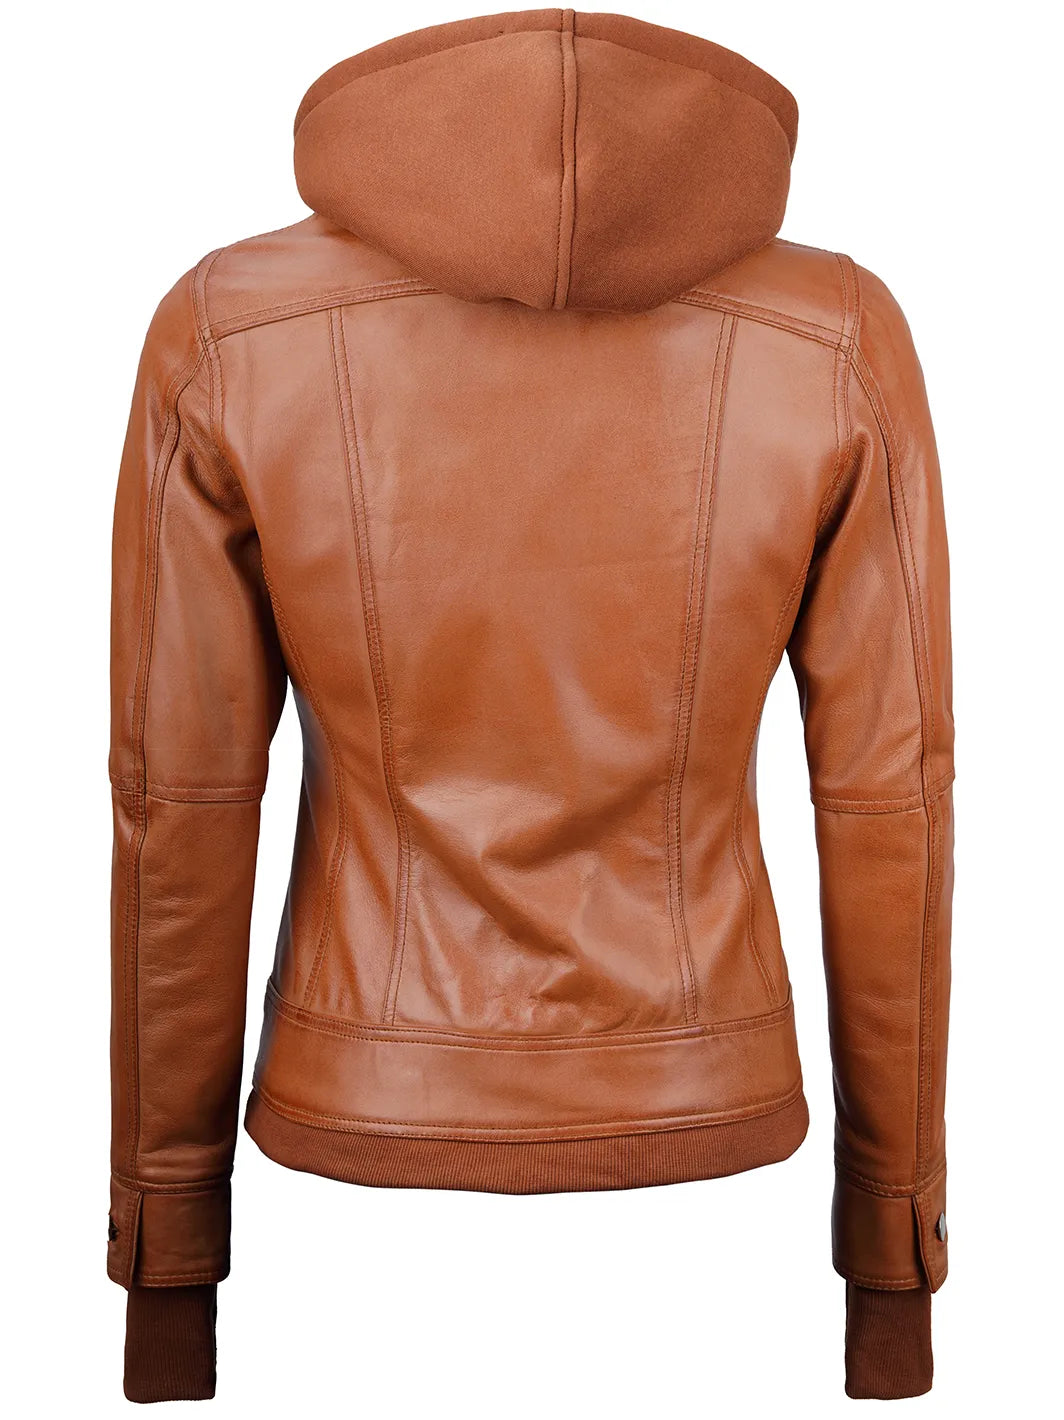 Womens hooded leather jacket